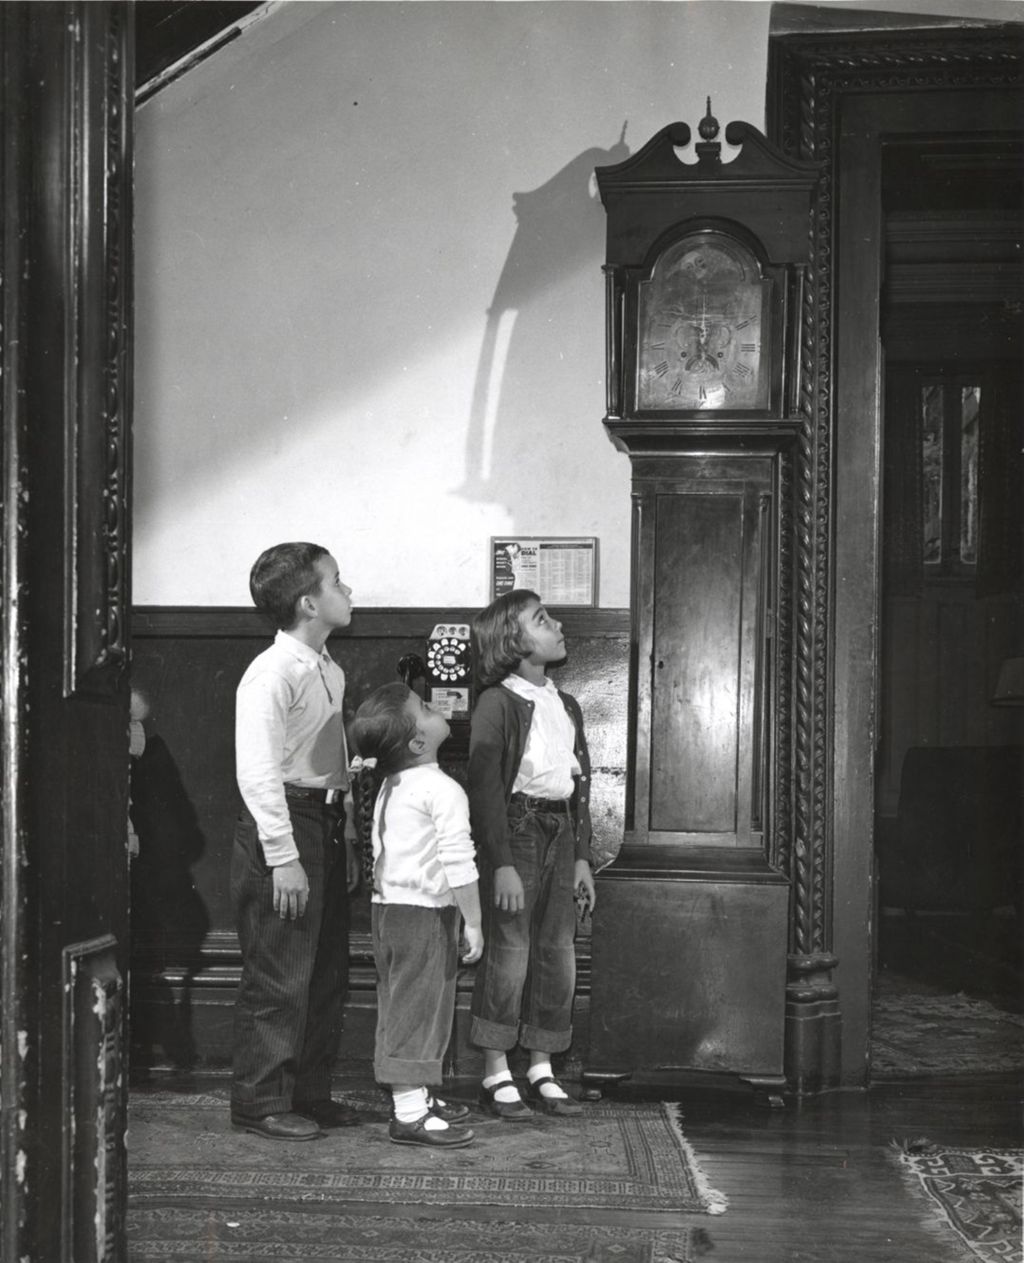 Miniature of Three children looking up at grandfather clock